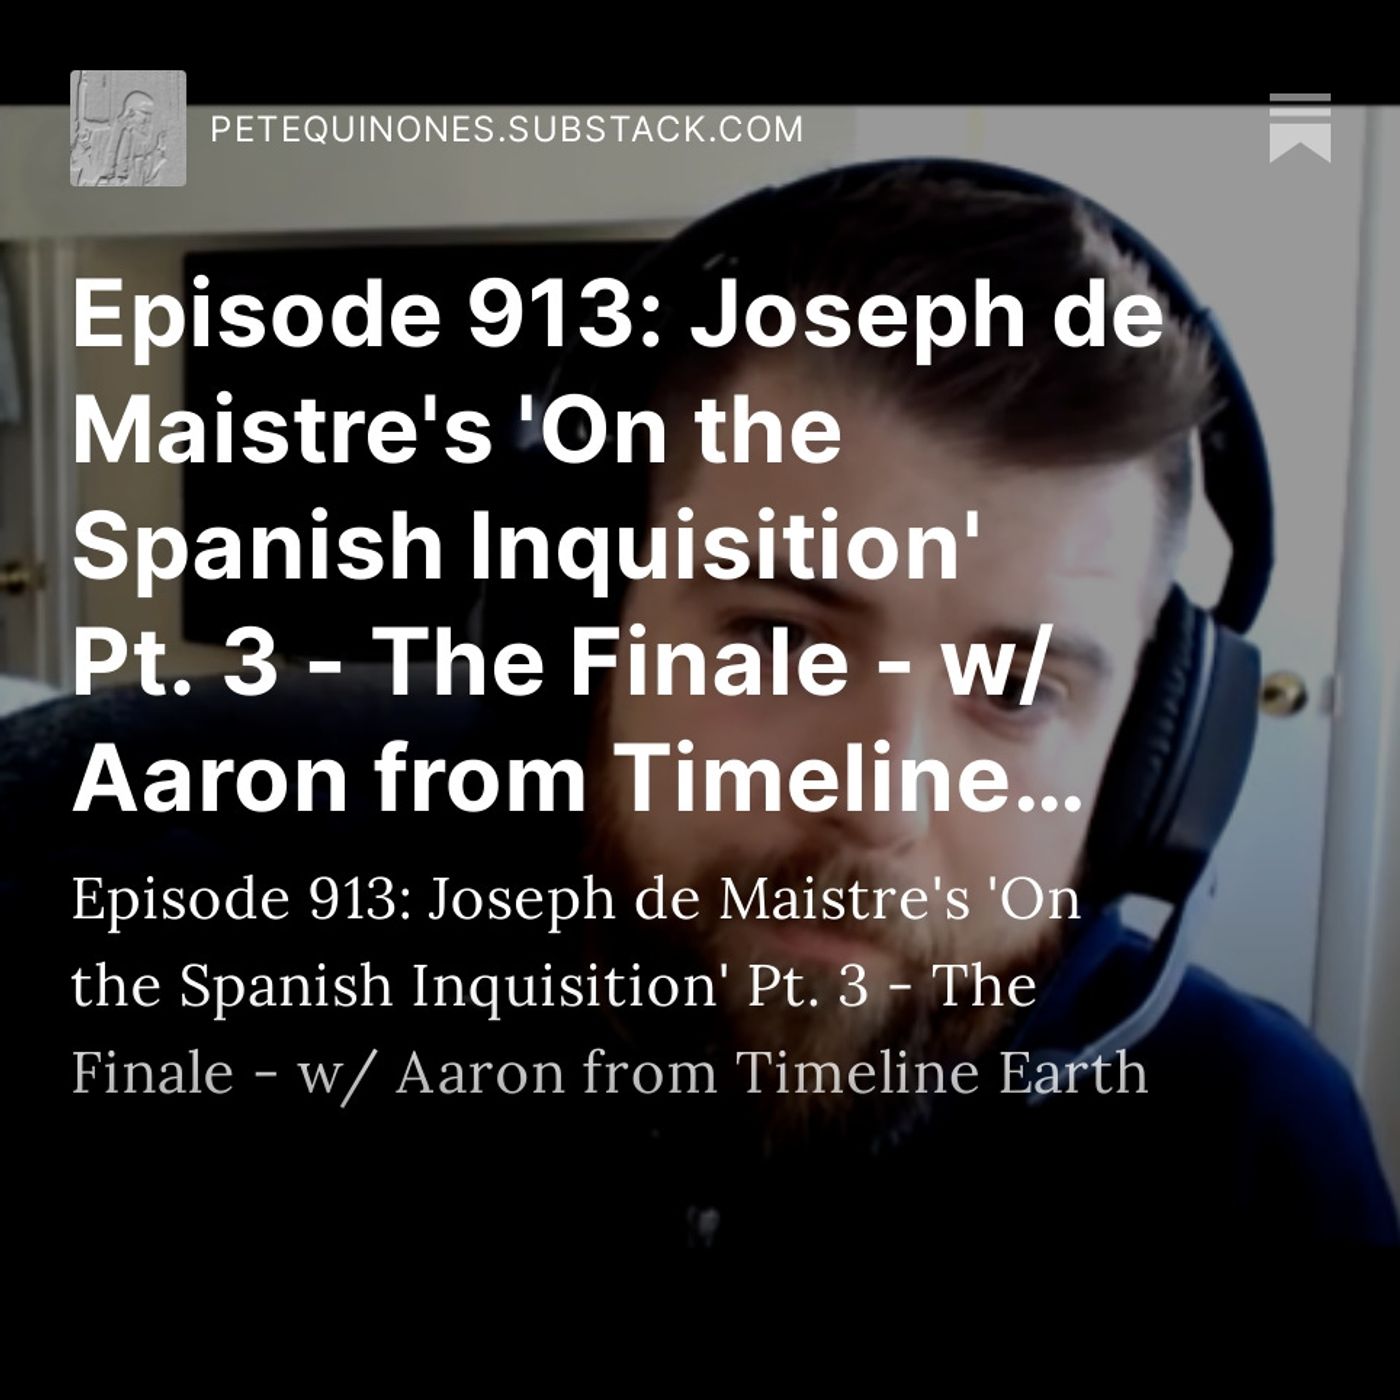 Episode 913: Joseph de Maistre's 'On the Spanish Inquisition' Pt. 3 - The Finale - w/ Aaron from Timeline Earth